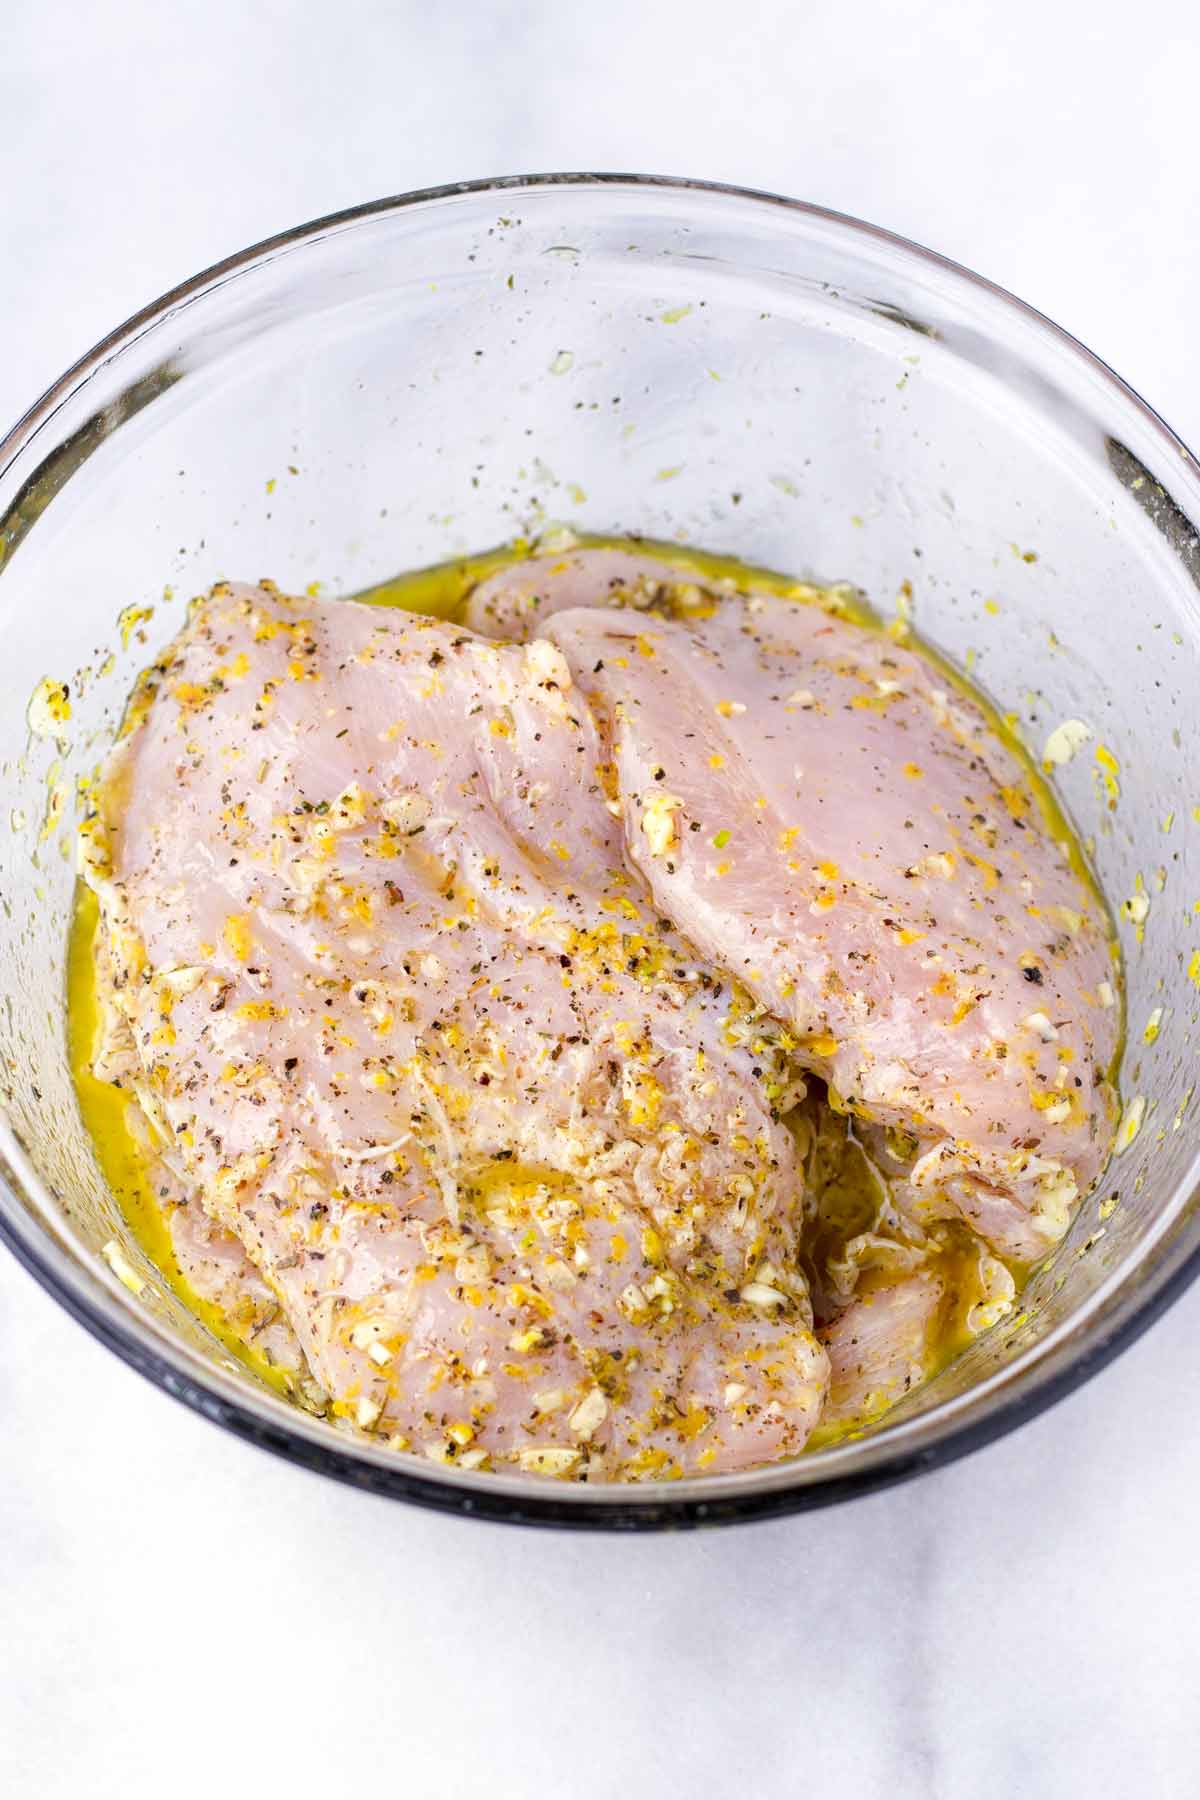 How Long Can You Marinate Chicken In Lime Juice? 